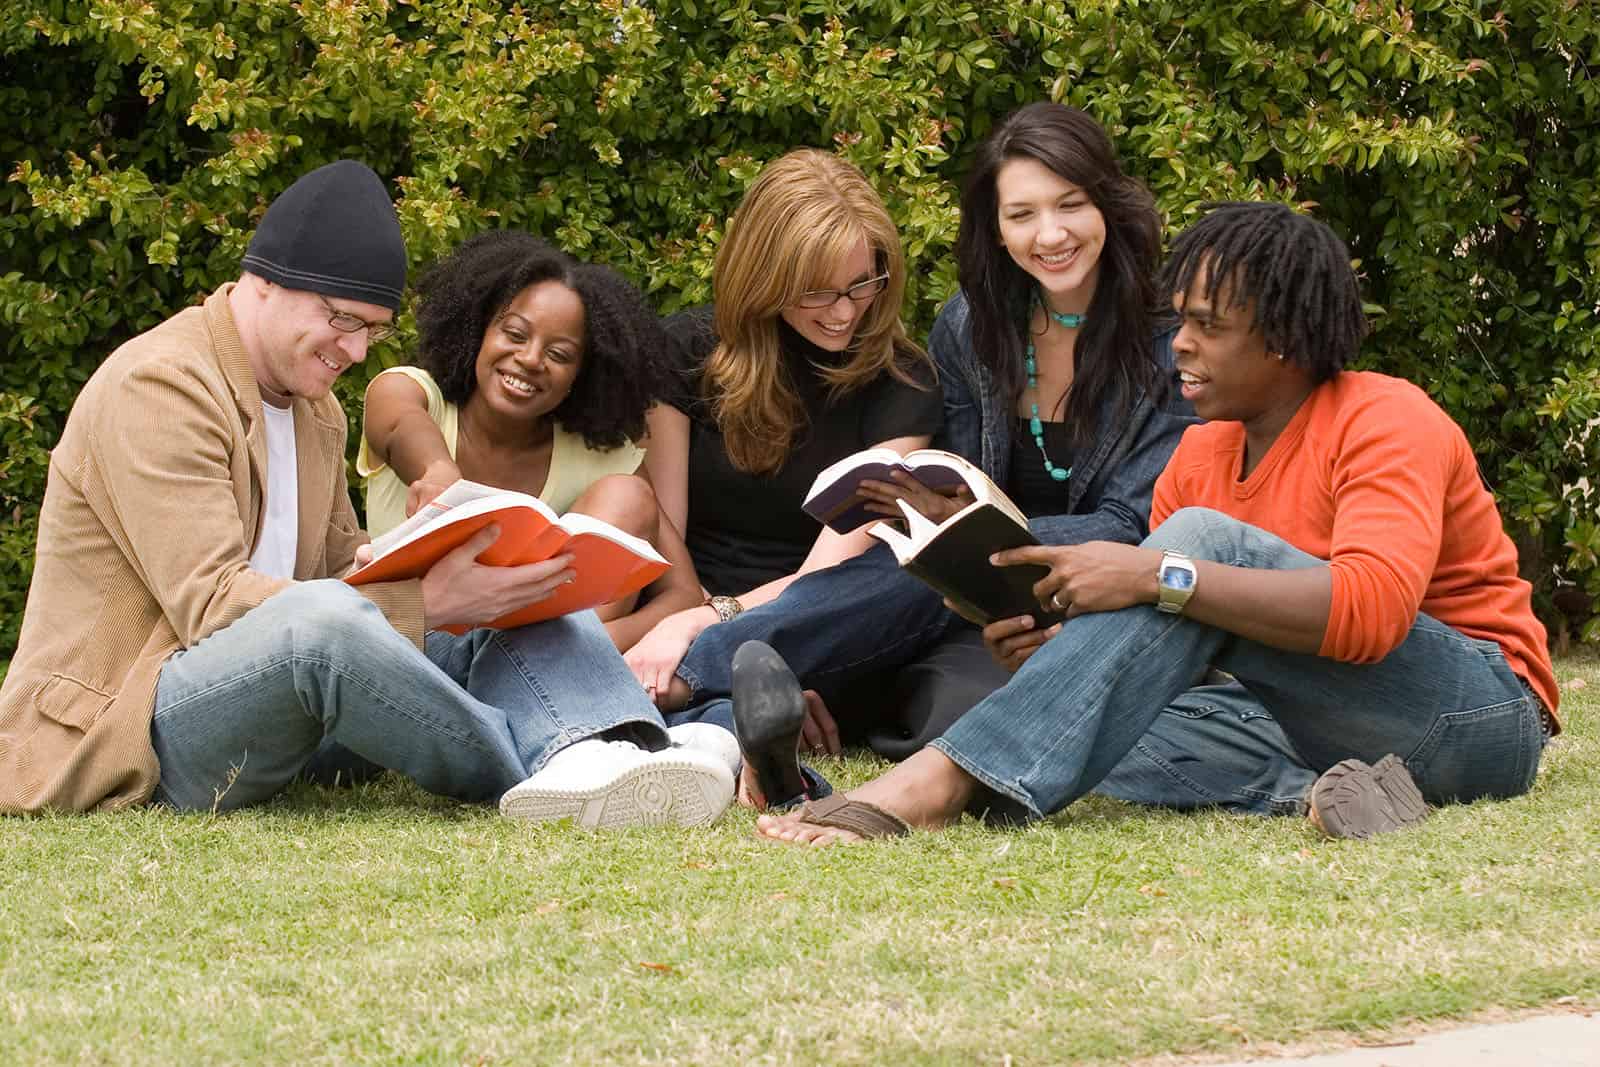 students studying in grass